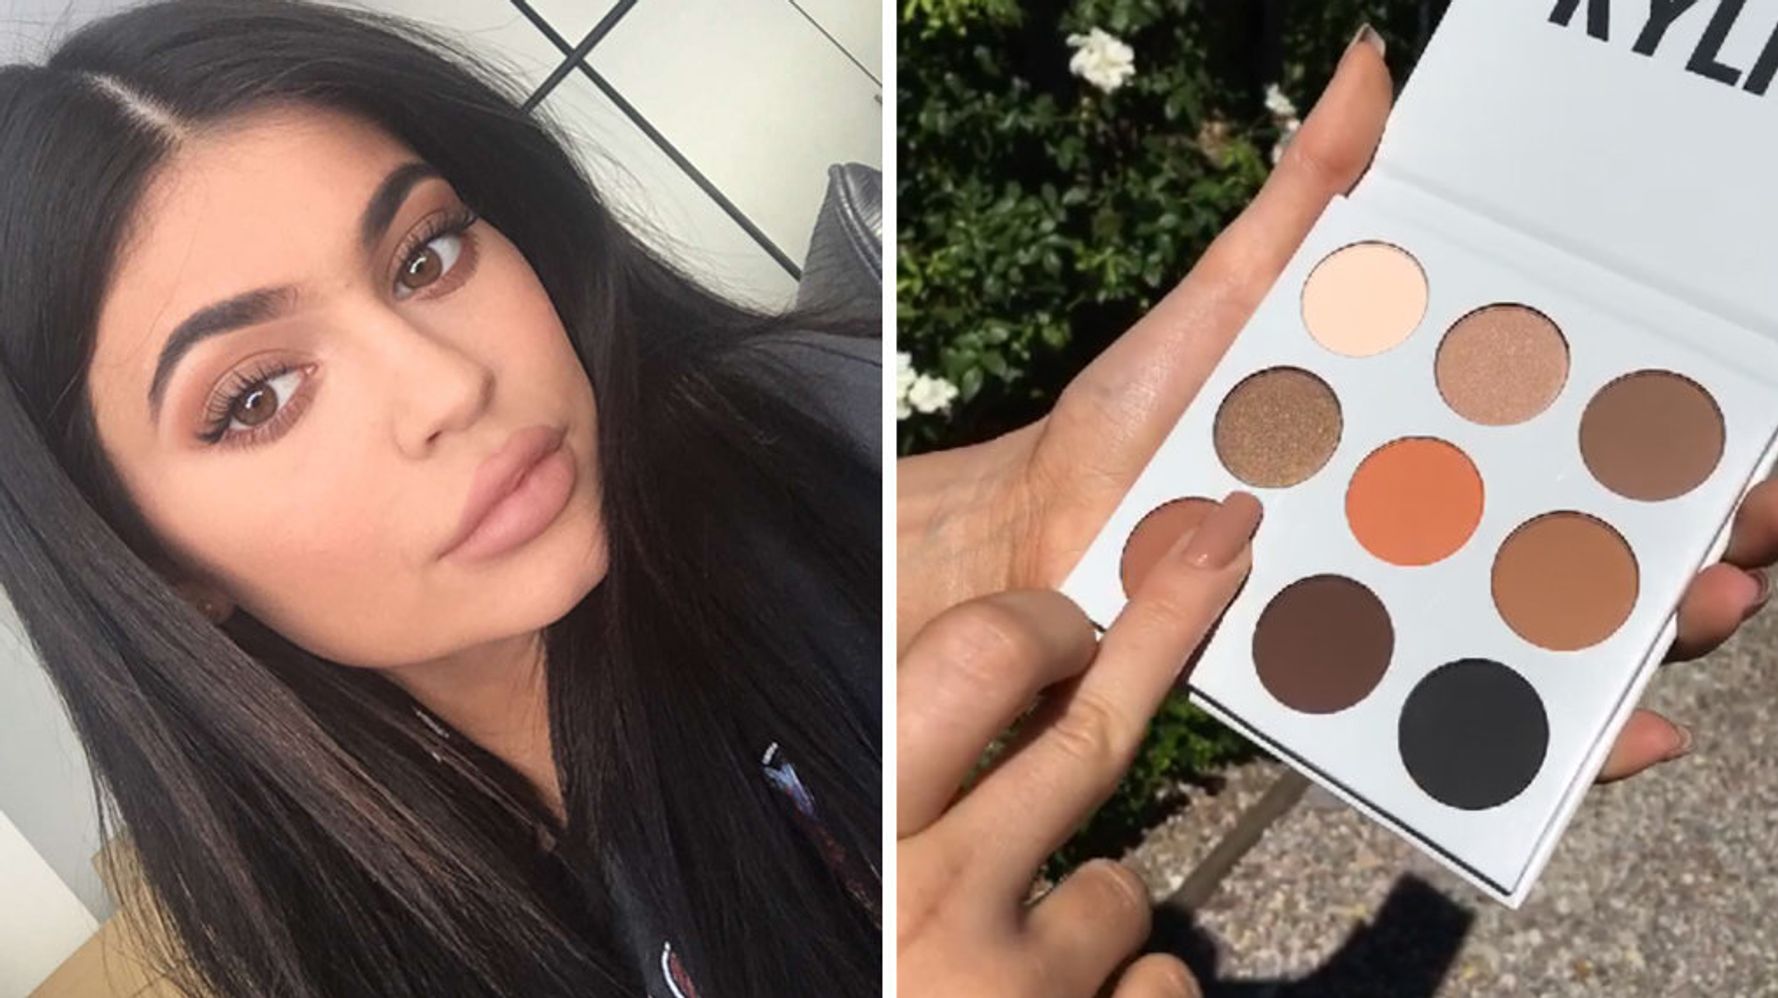 Kylie Kylie Cosmetics Bronze Kyshadow Palette Sold Out In One Minute | HuffPost UK Style